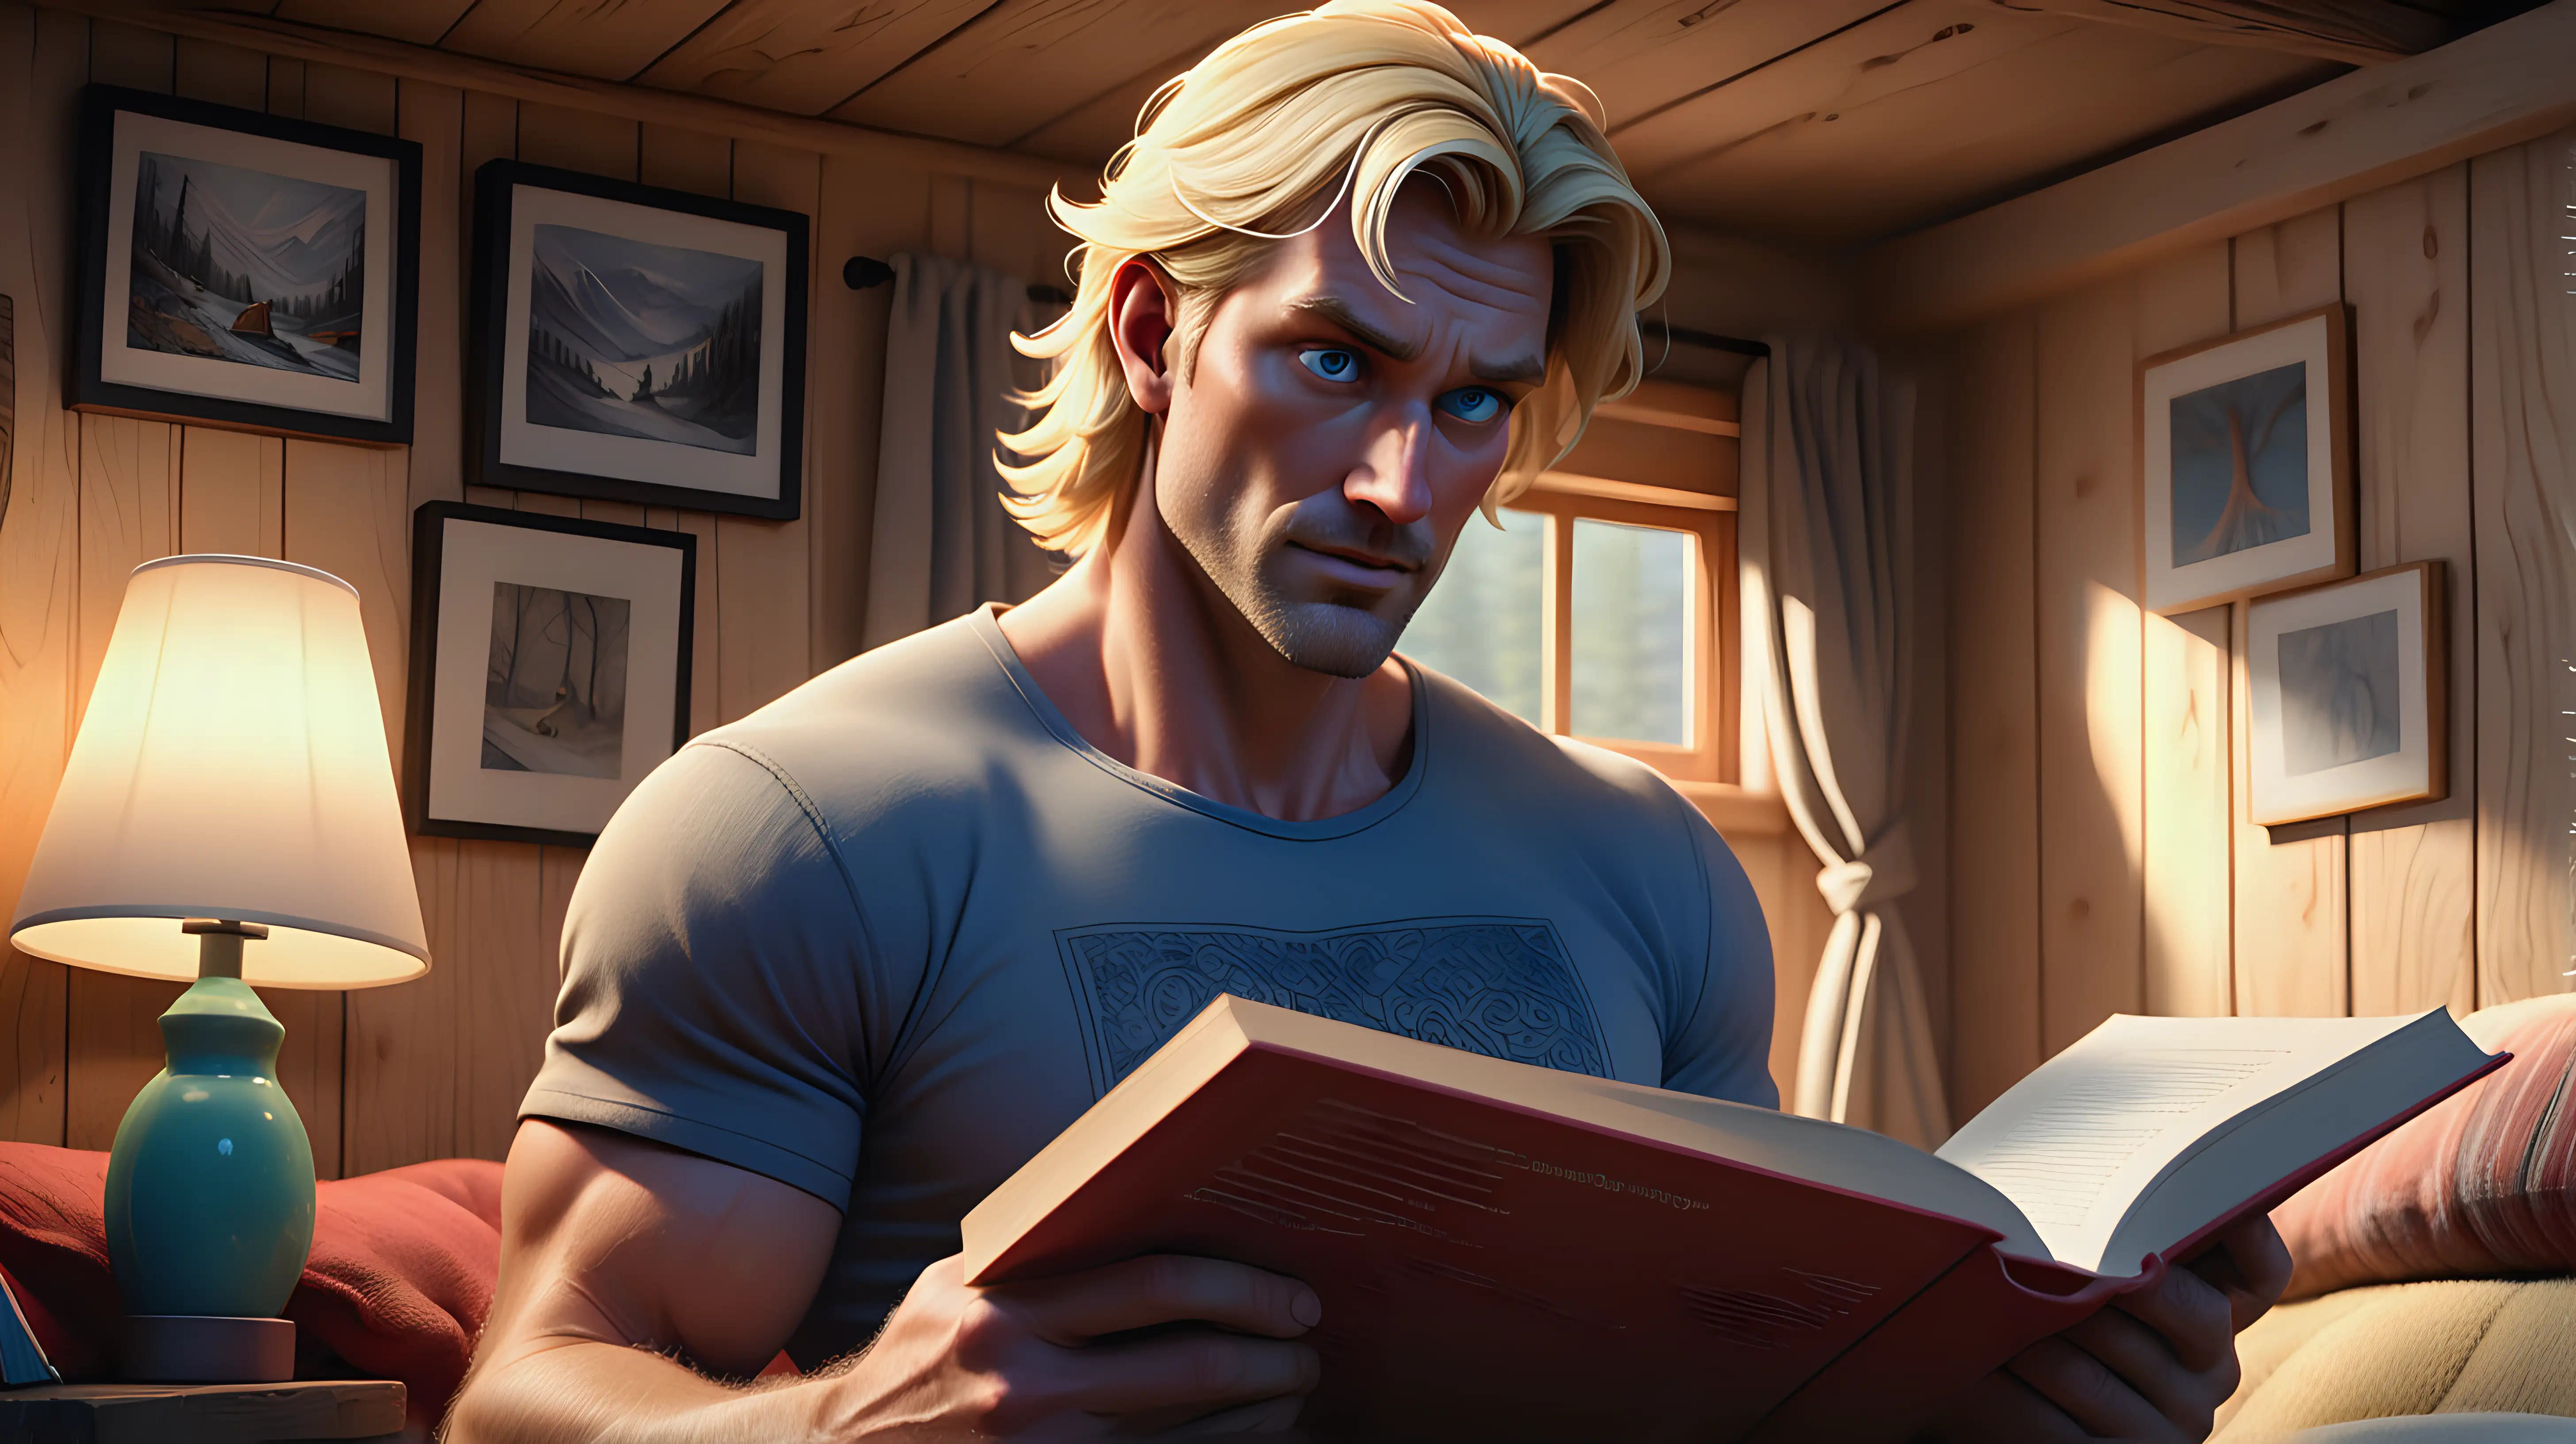 Highly detailed, fantastical style animation with vibrant colors and dramatic, soft lighting, of a rugged, blonde man in his mid-30s named Jack. He has a fit and athletic build, stands 6'2" tall, with short, tousled blonde hair, blue eyes, and a light tan complexion, wearing a loose fitting plain t-shirt, reading a book and relaxing with a content expression, in a cozy cabin.